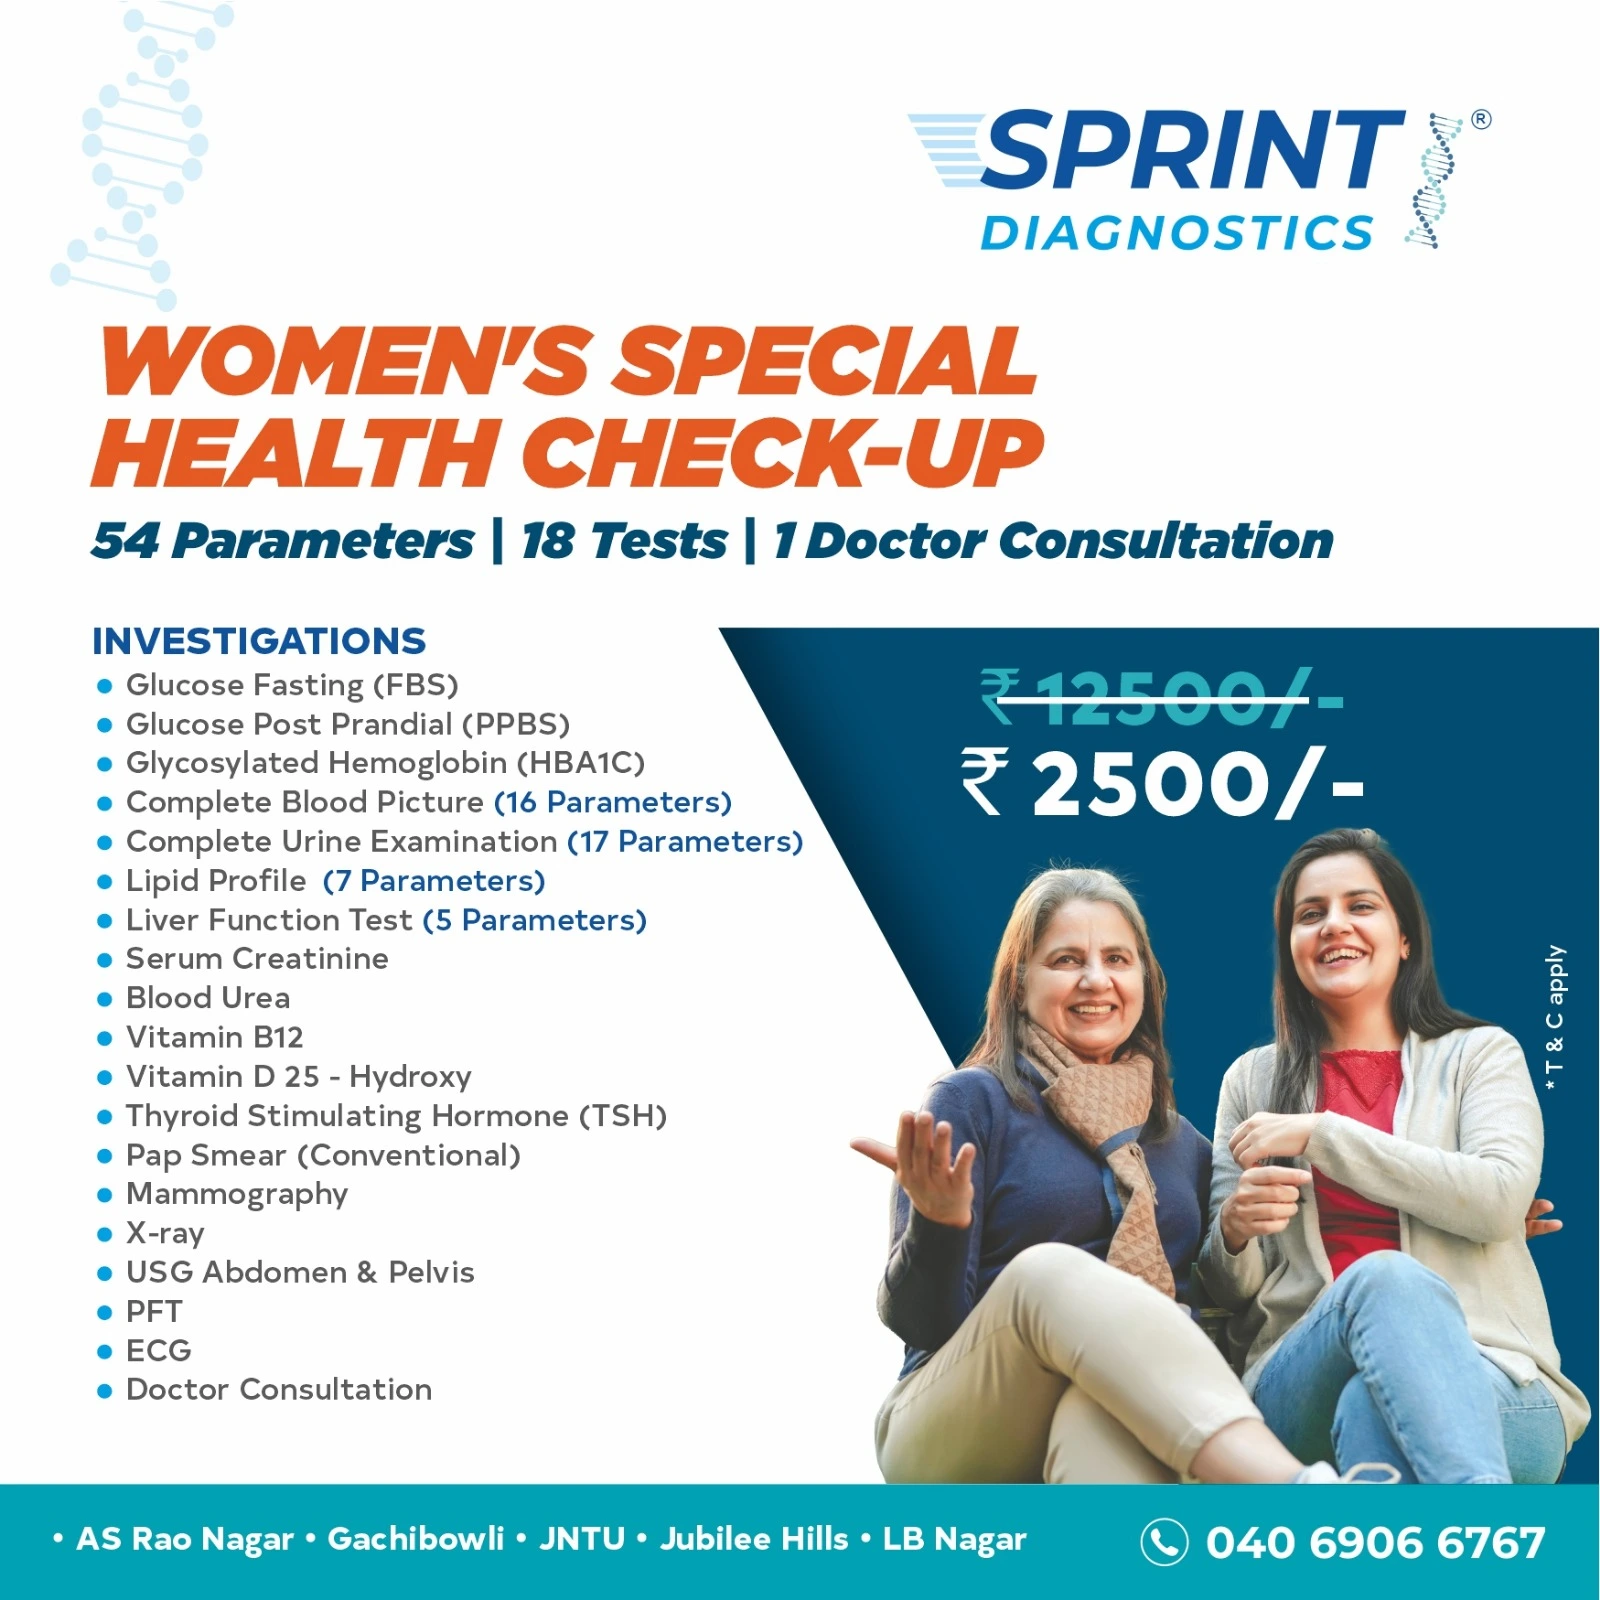 Women's Special Health Check-Up